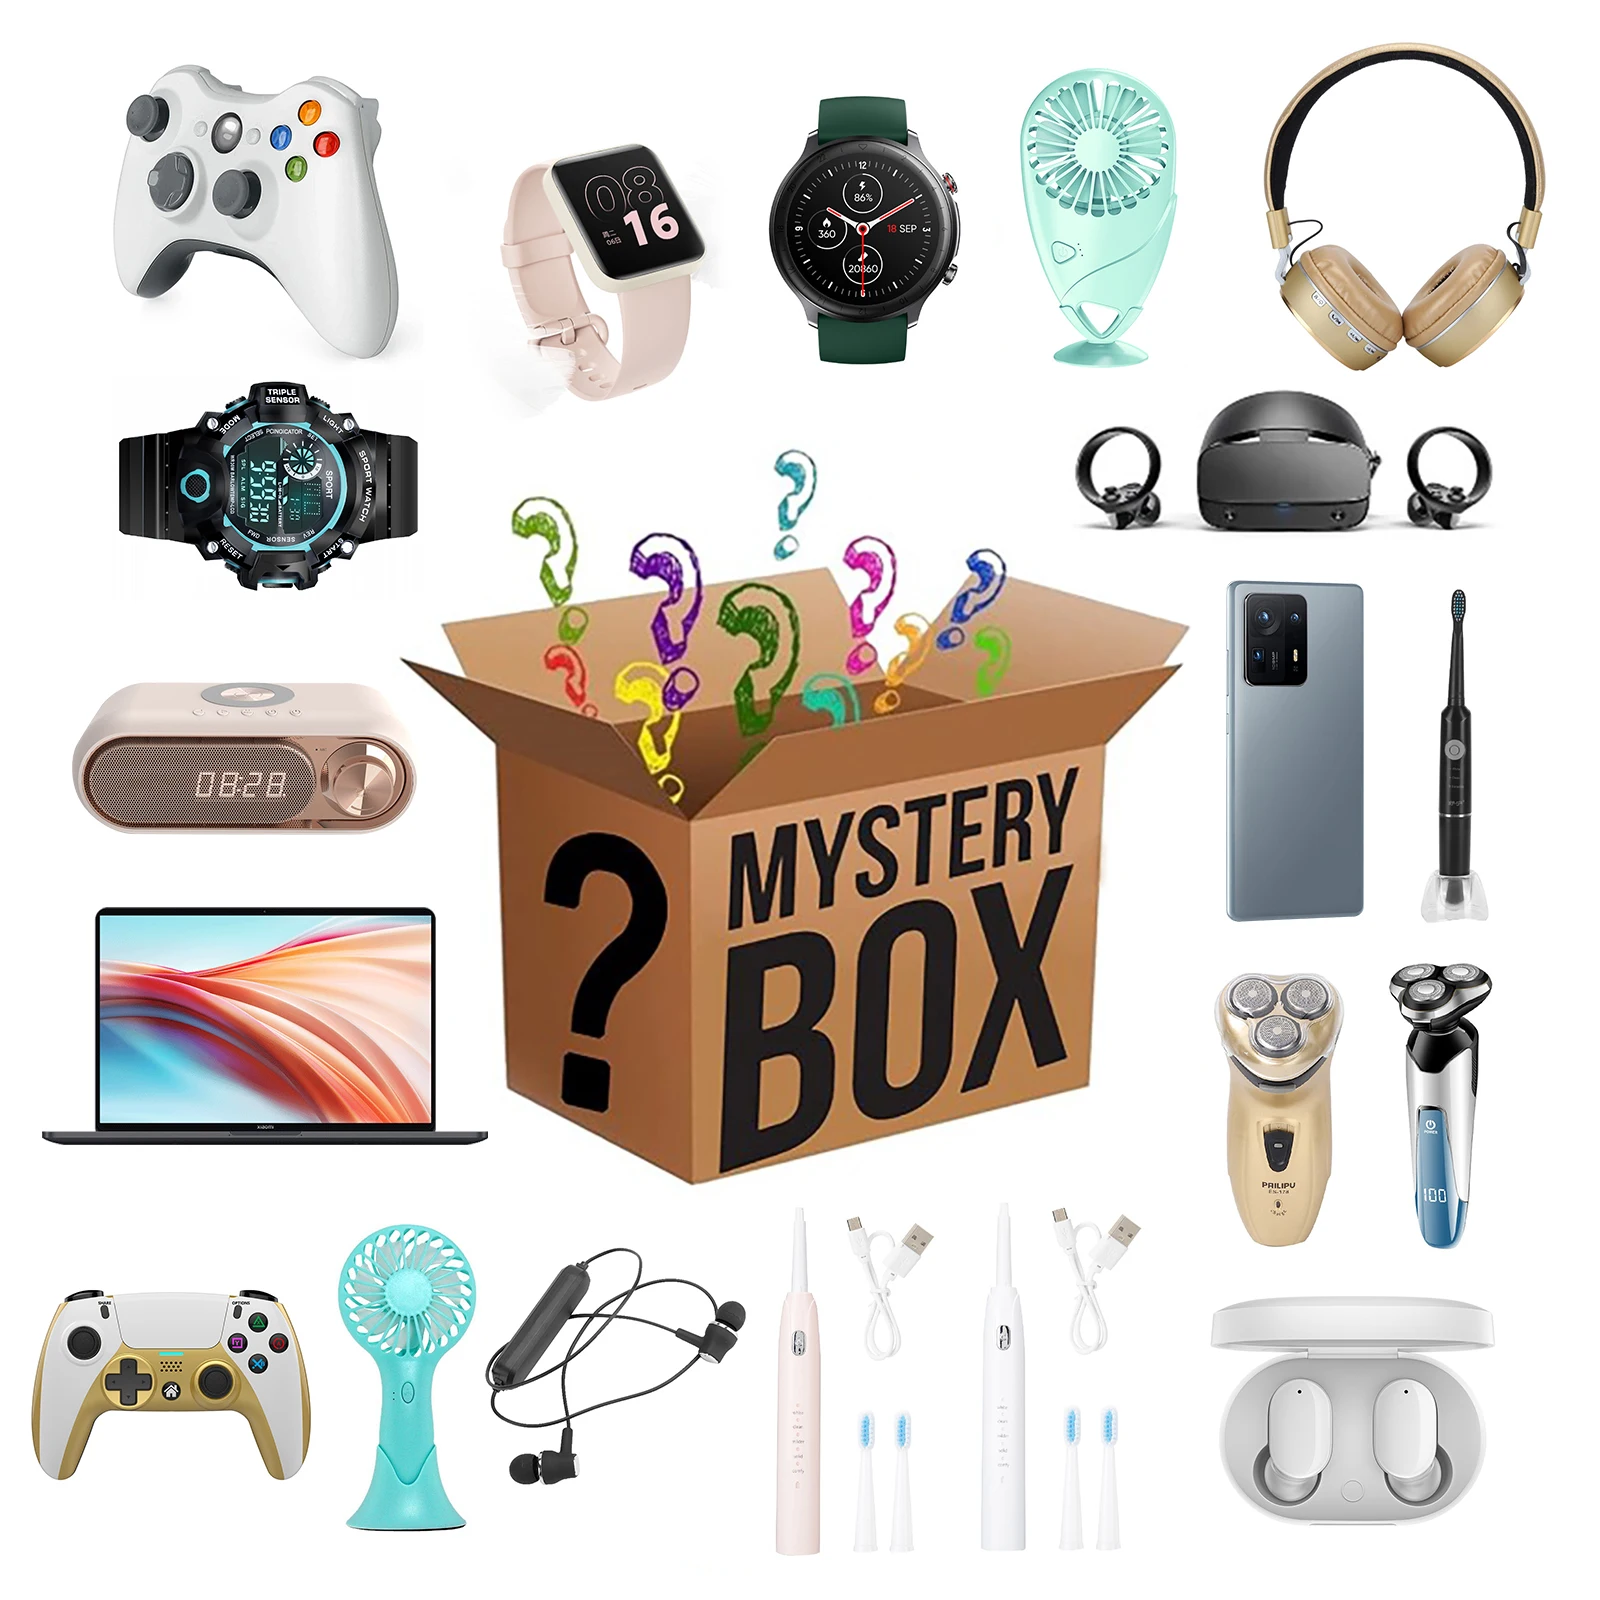 

1XLucky Mystery Box Random Home Item Electronic Style Product Such Gamepads Headsets Smart Watches Fan Hair Curler Surprise Gift